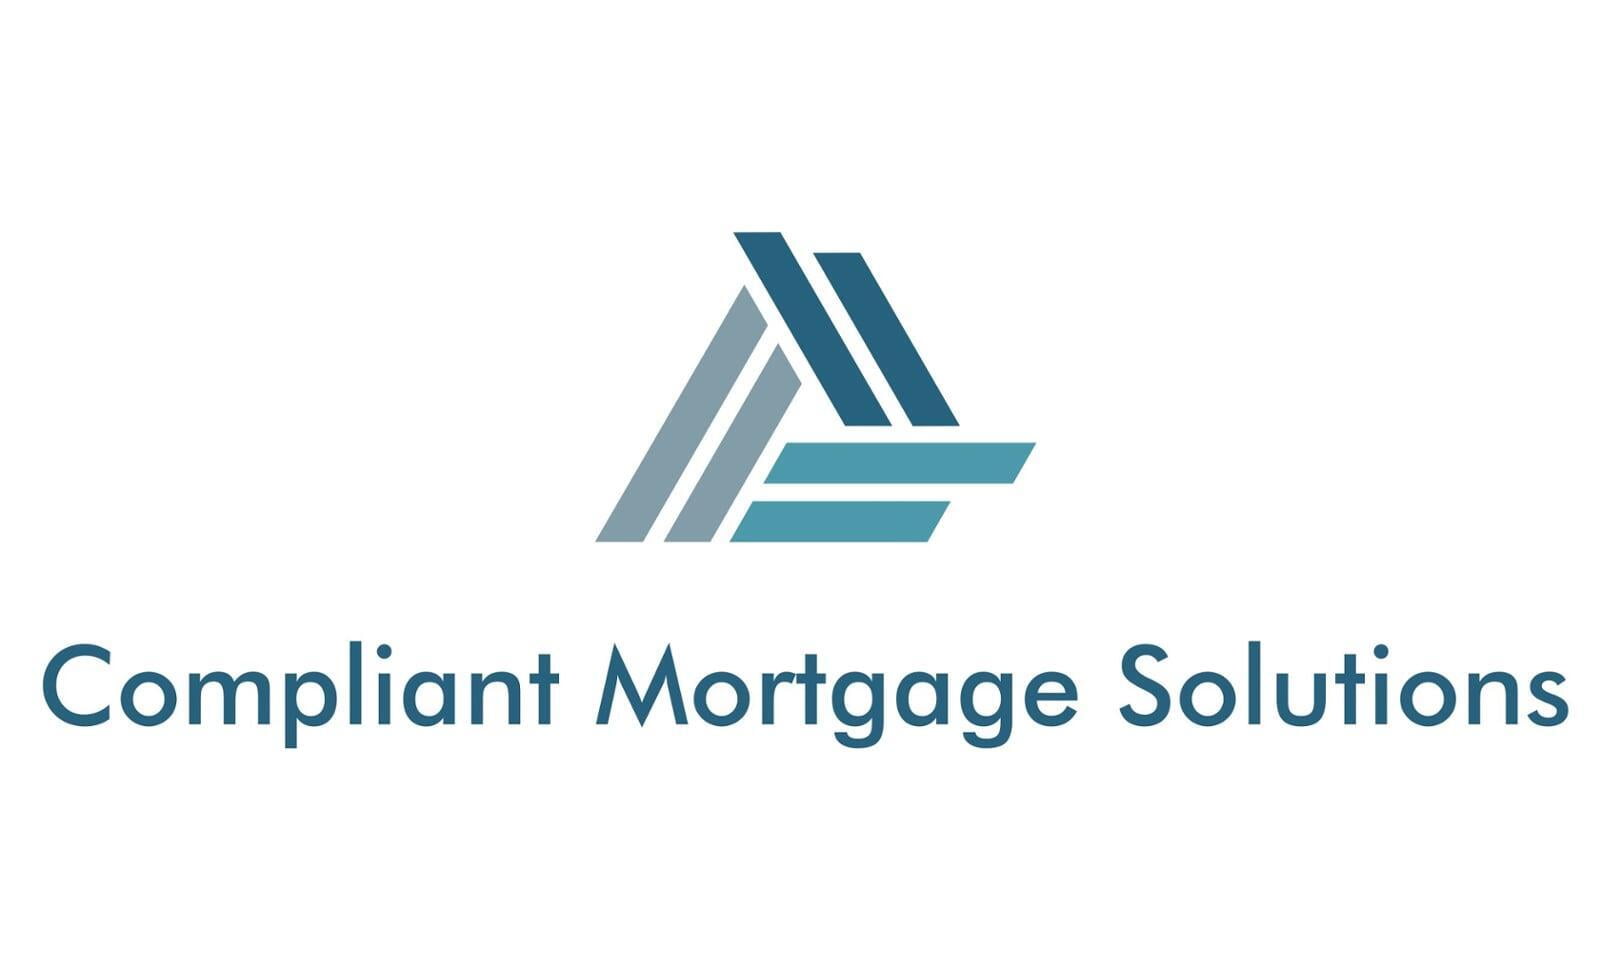 Compliant Mortgage Solutions